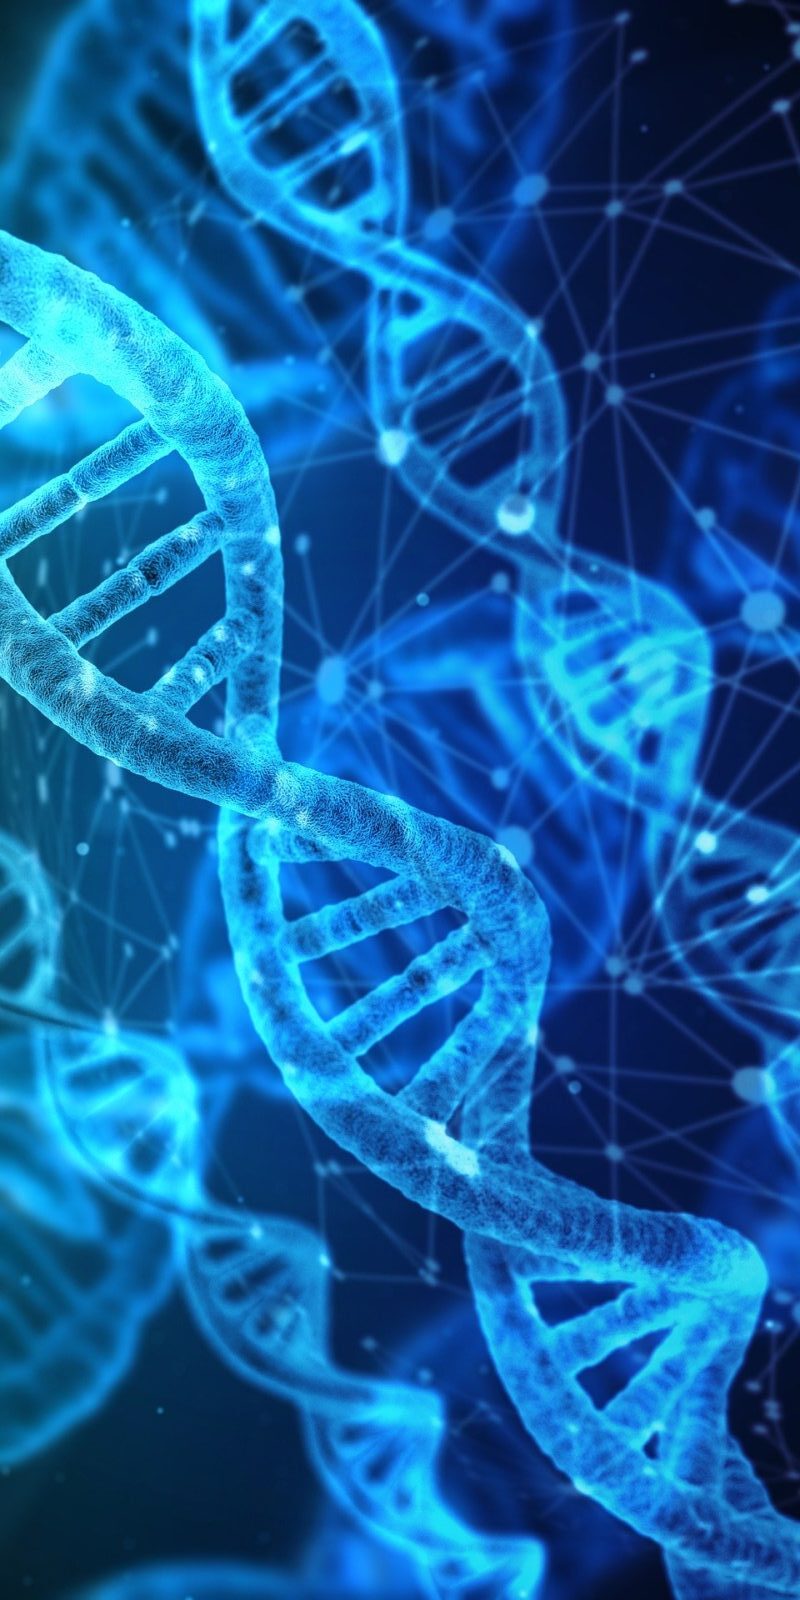 Who Won The Race To Solve The DNA Structure?